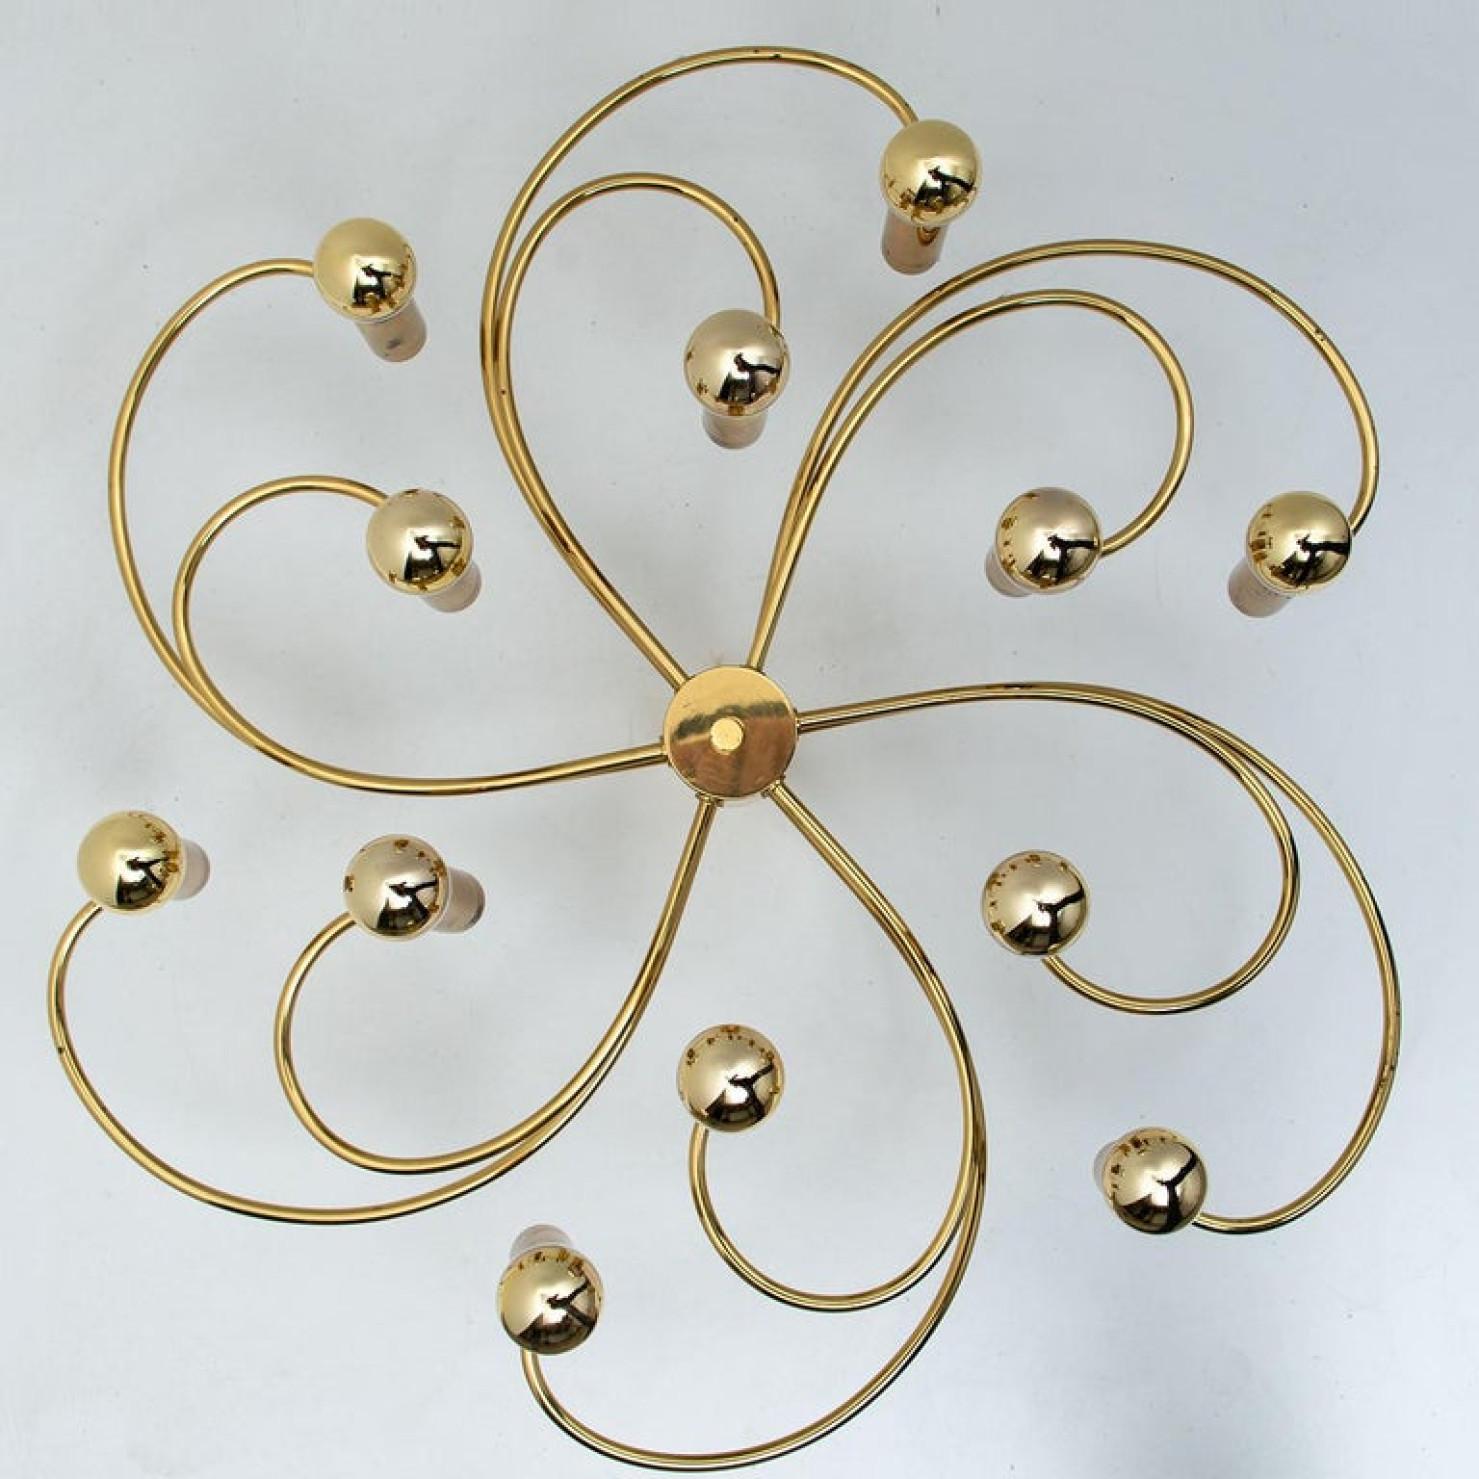 1 of the 2 Leola Sculptural Brass 13-Light Ceiling or Wall Flush Mount, 1970s For Sale 5